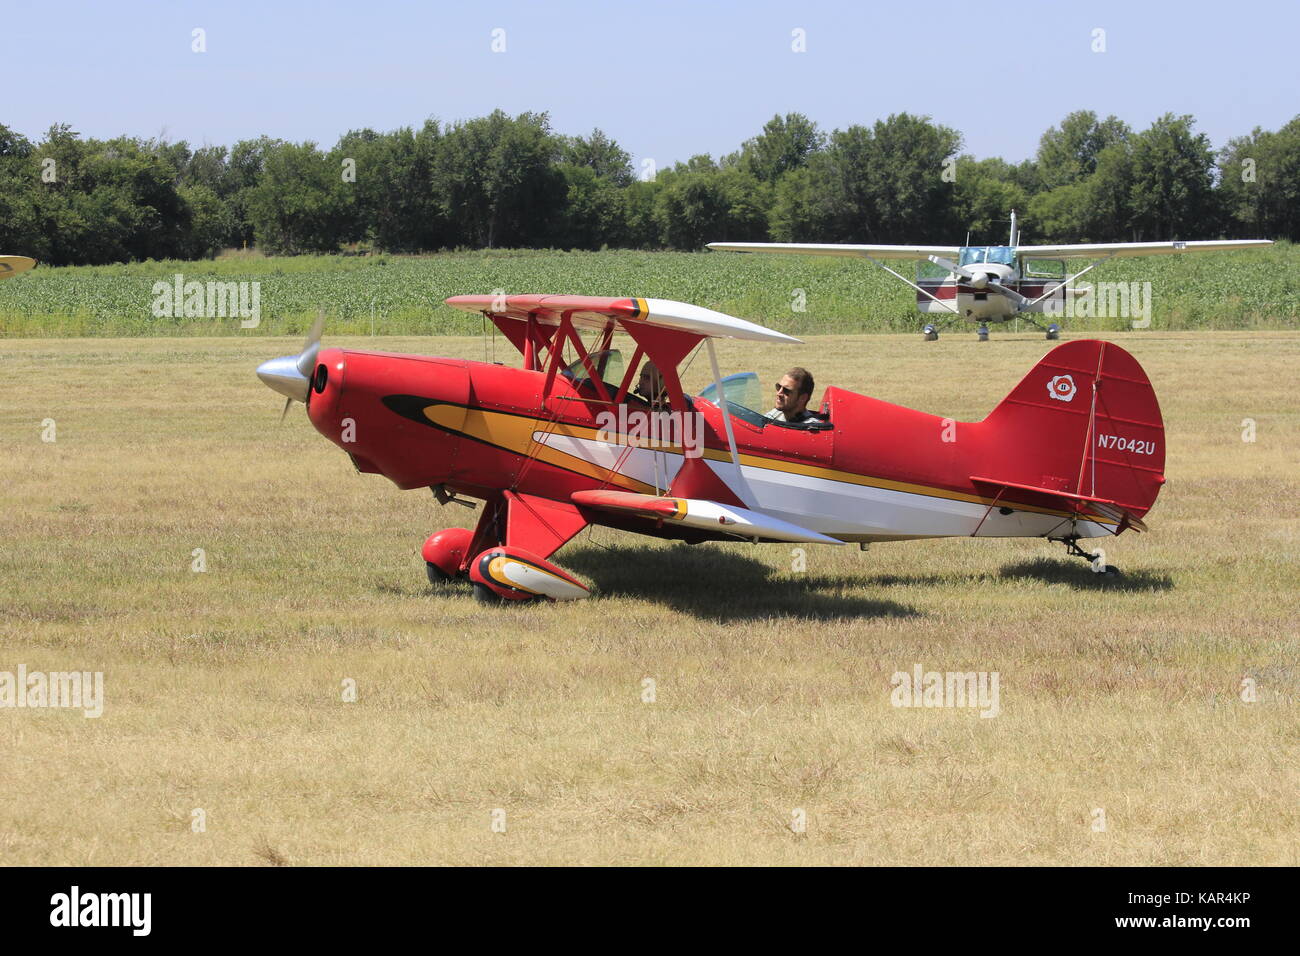 Red Airplane landing on a grass runway in Kansas. Stock Photo